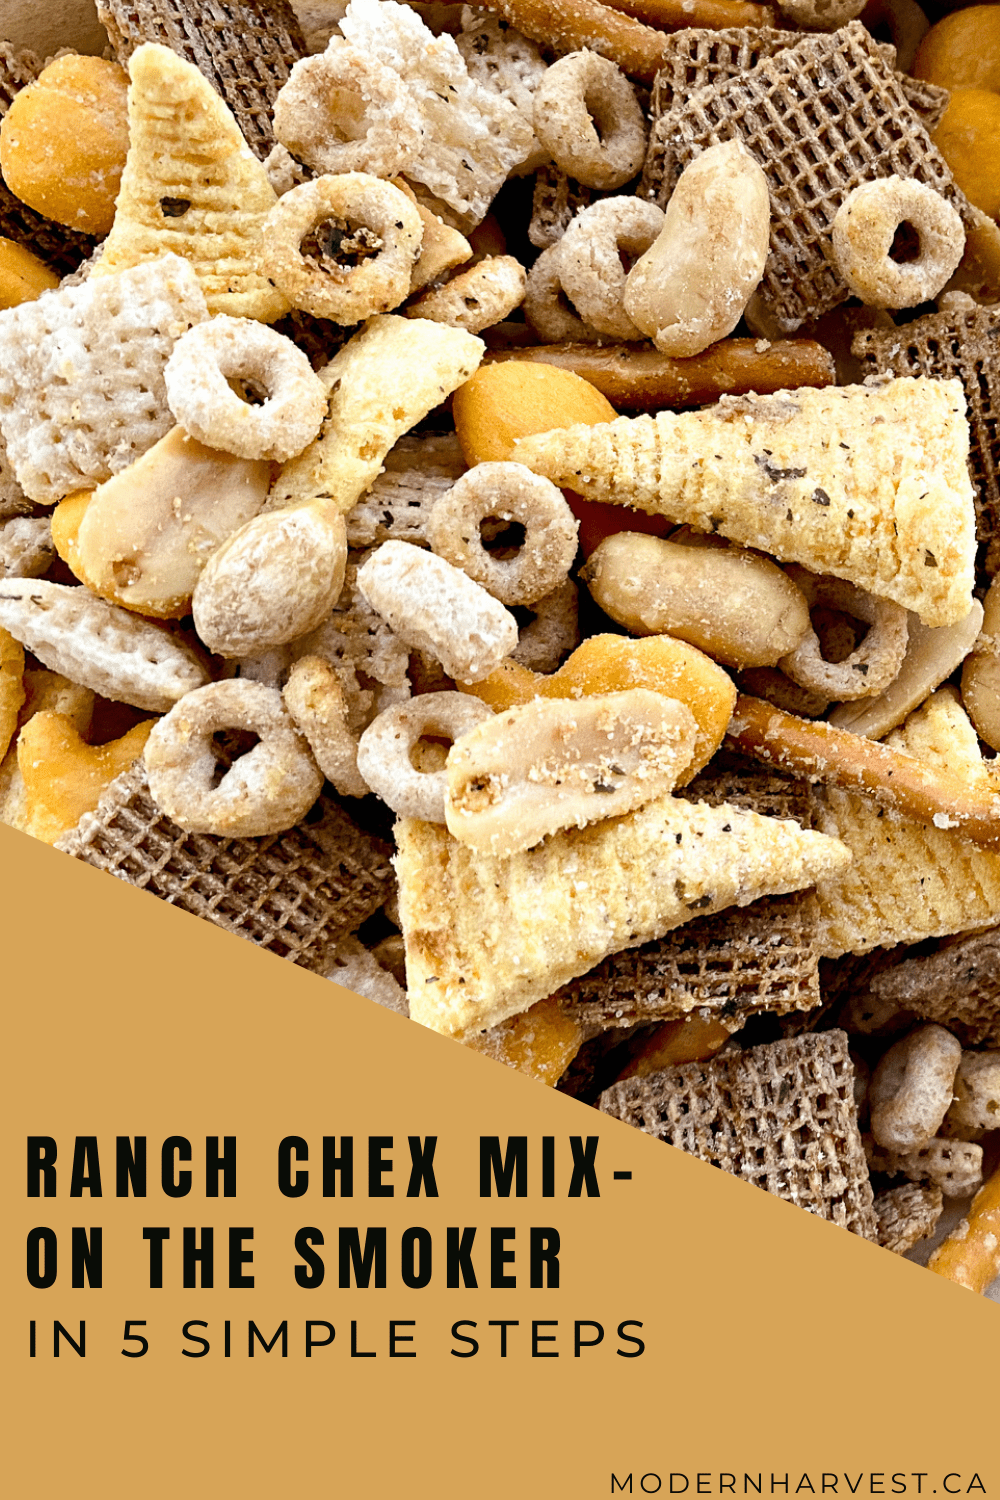 Pinterest image showing the chex mix ingredients.